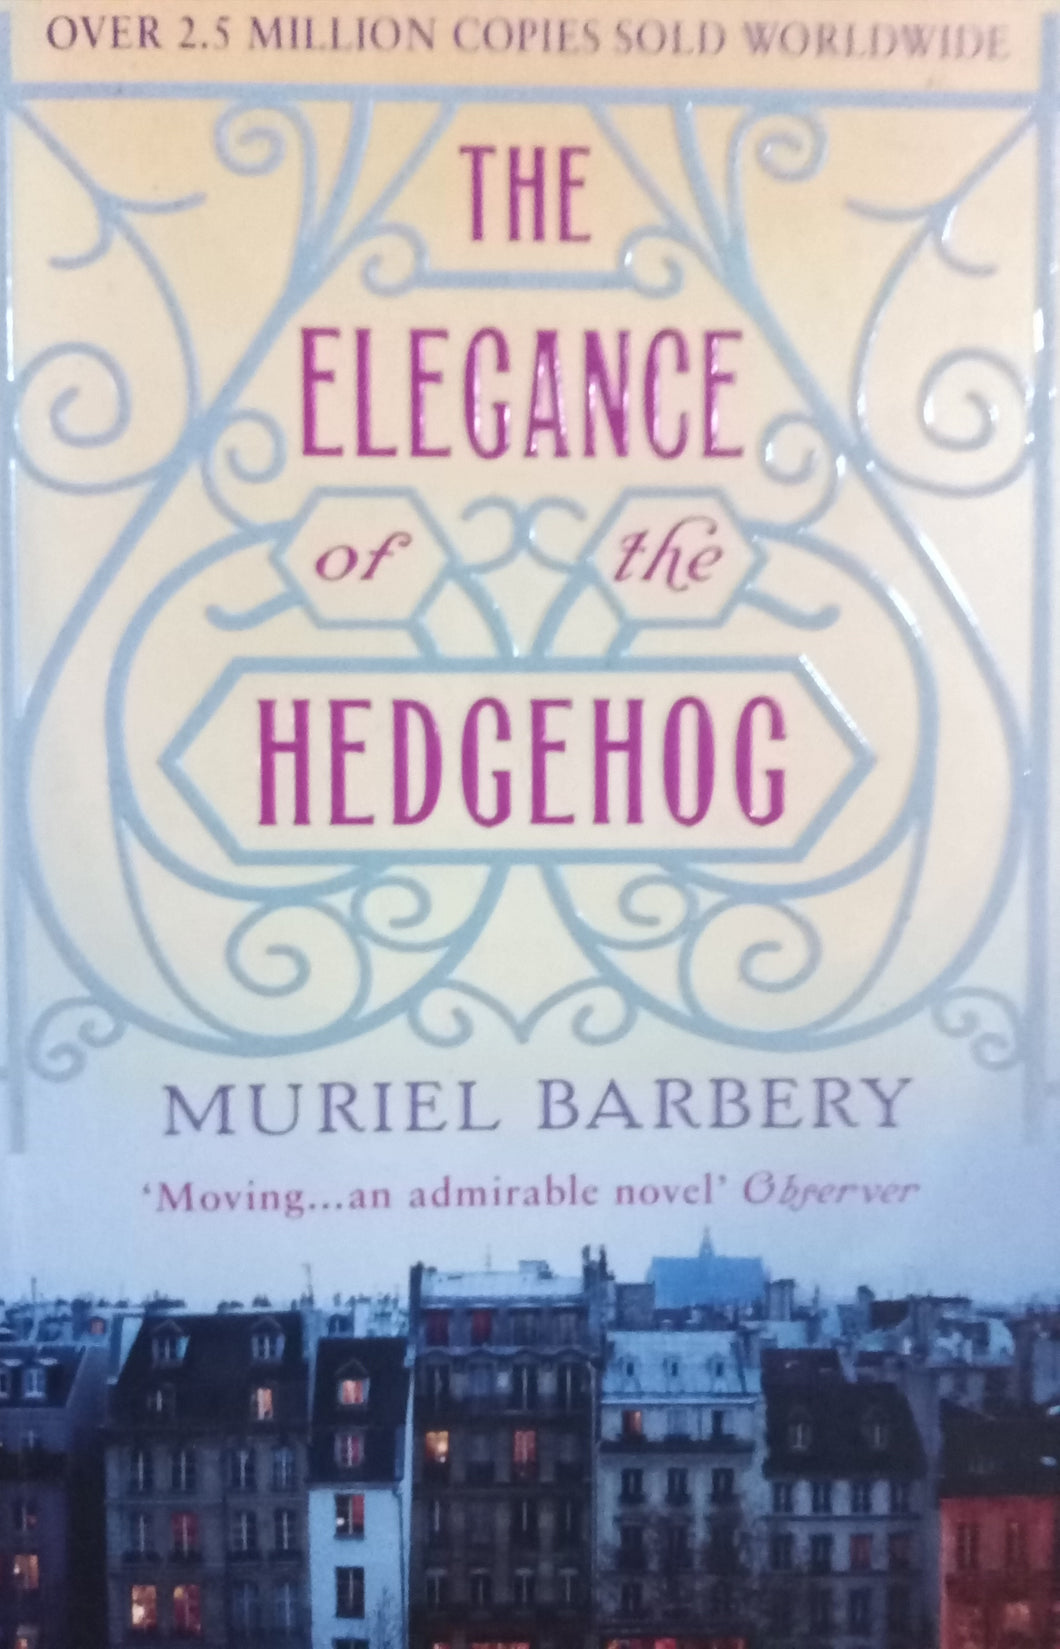 The elegance of the Hedgehog By Muriel Barbery